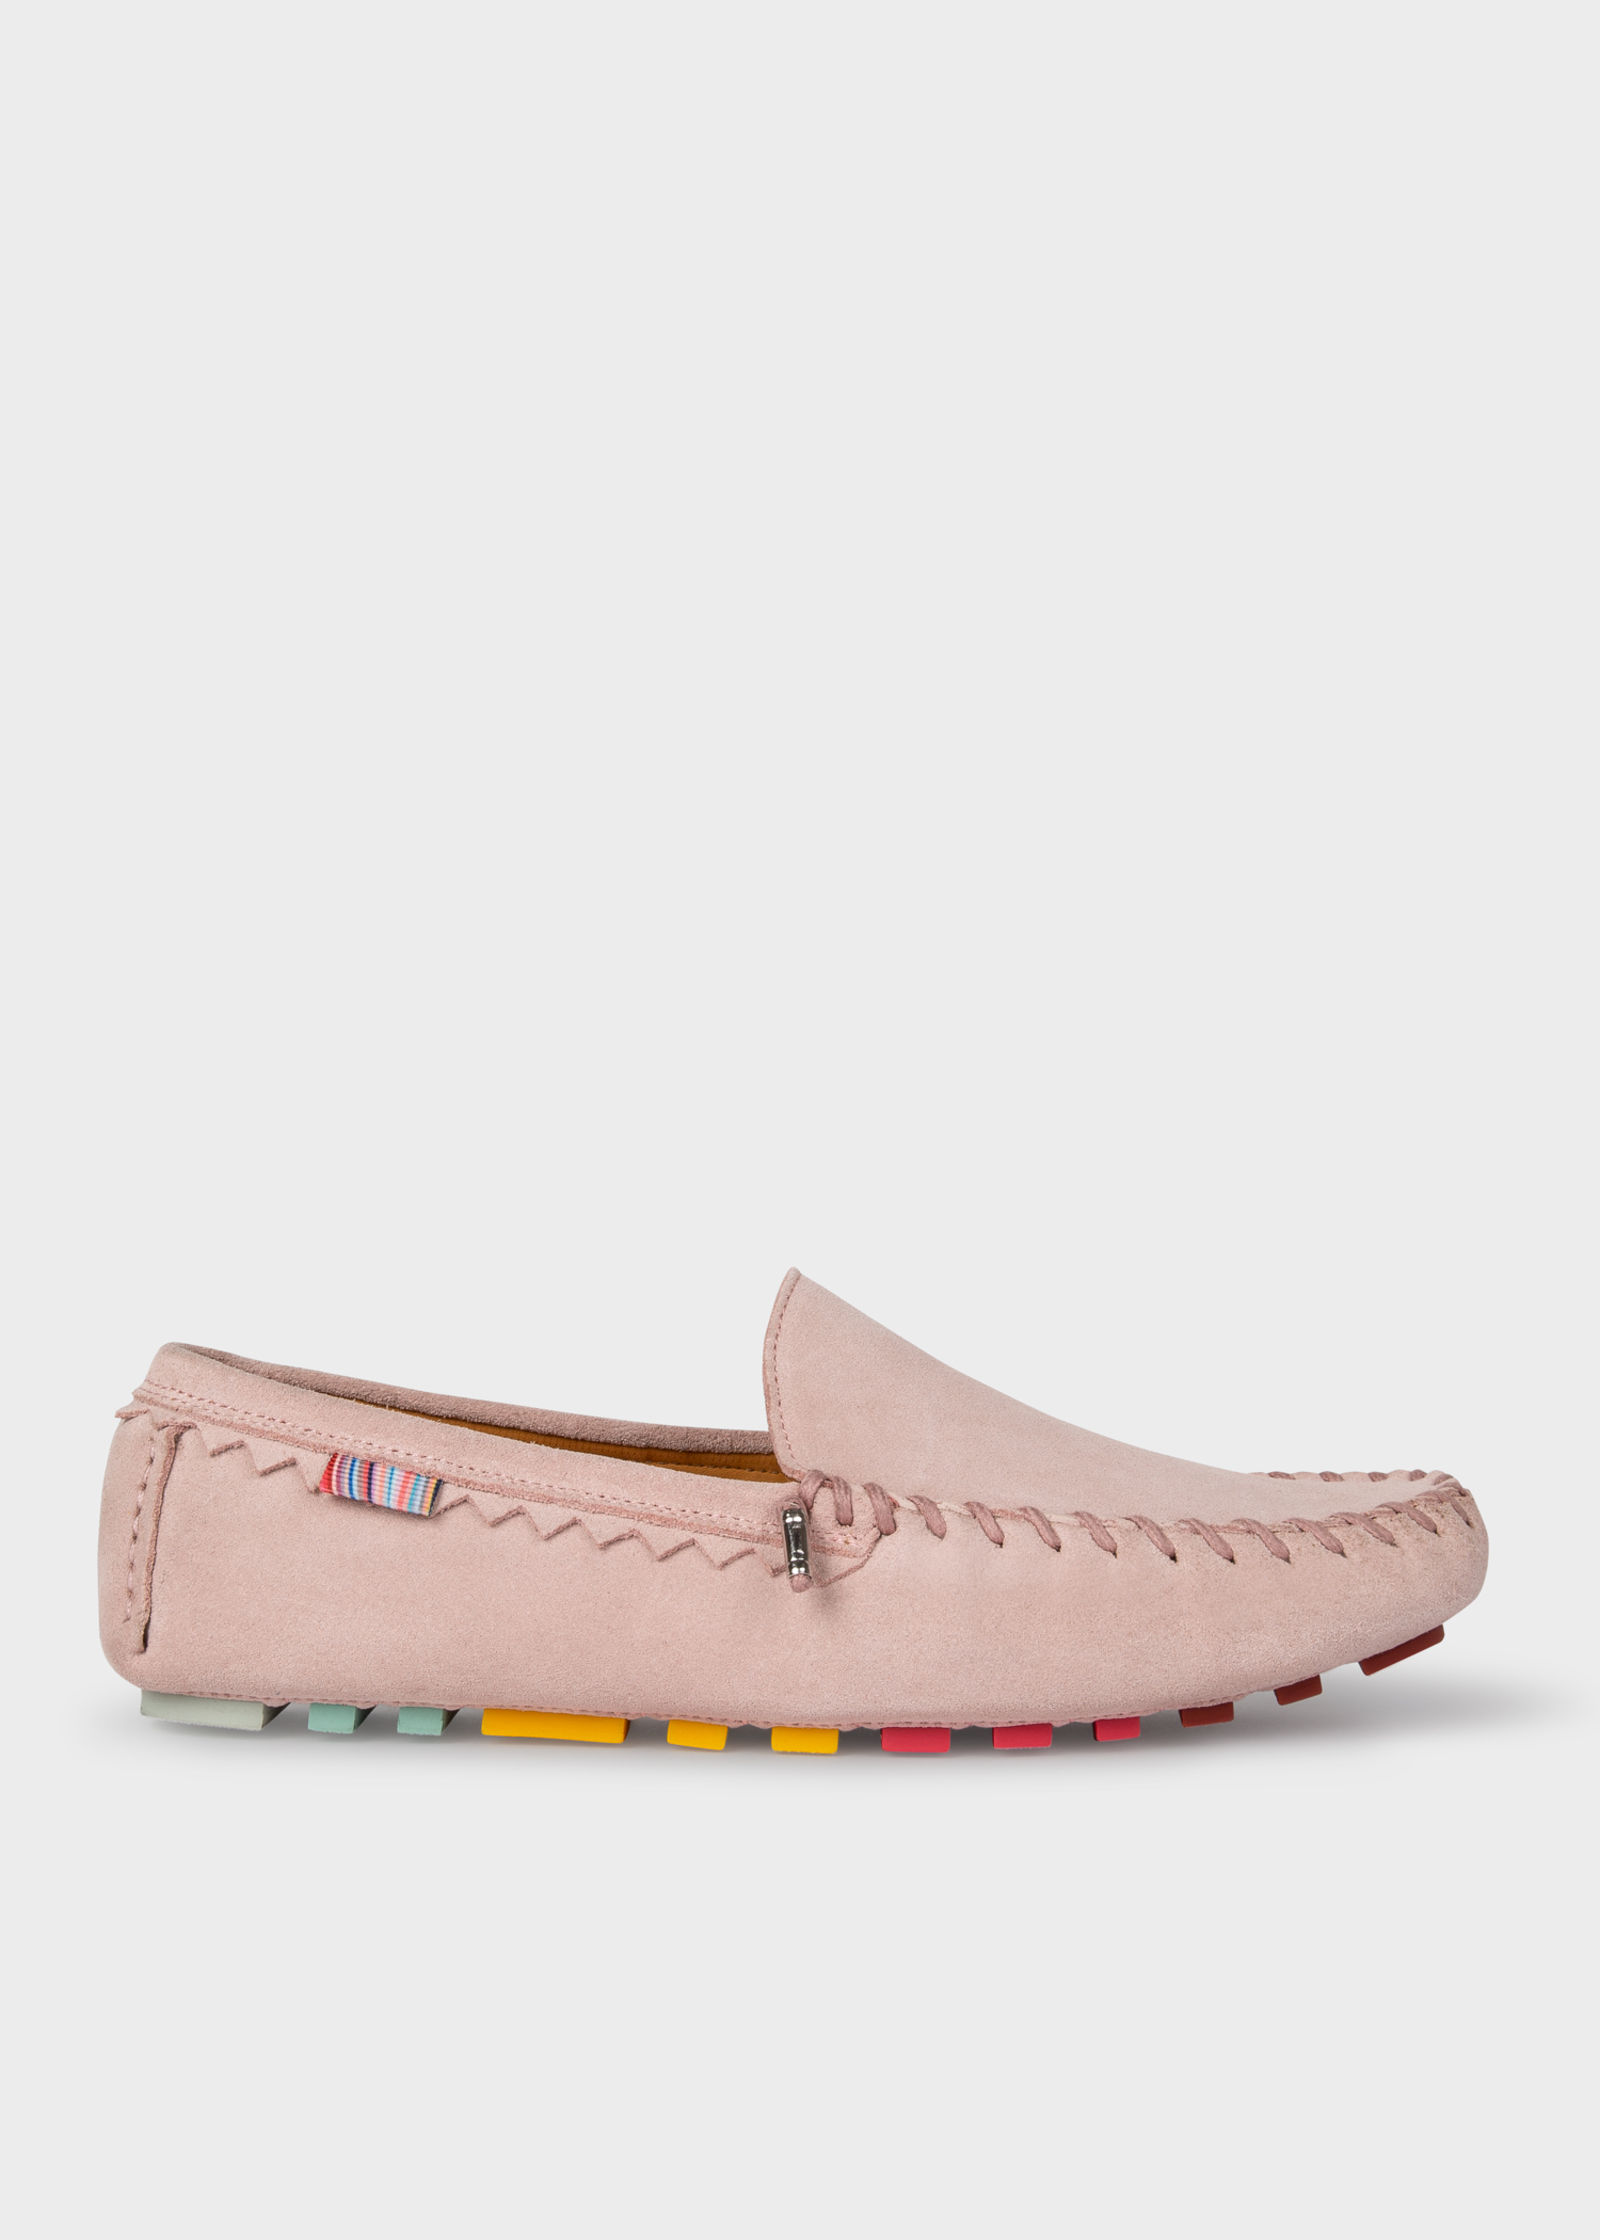 Paul Smith Pink Dustin Suede Driving Loafers